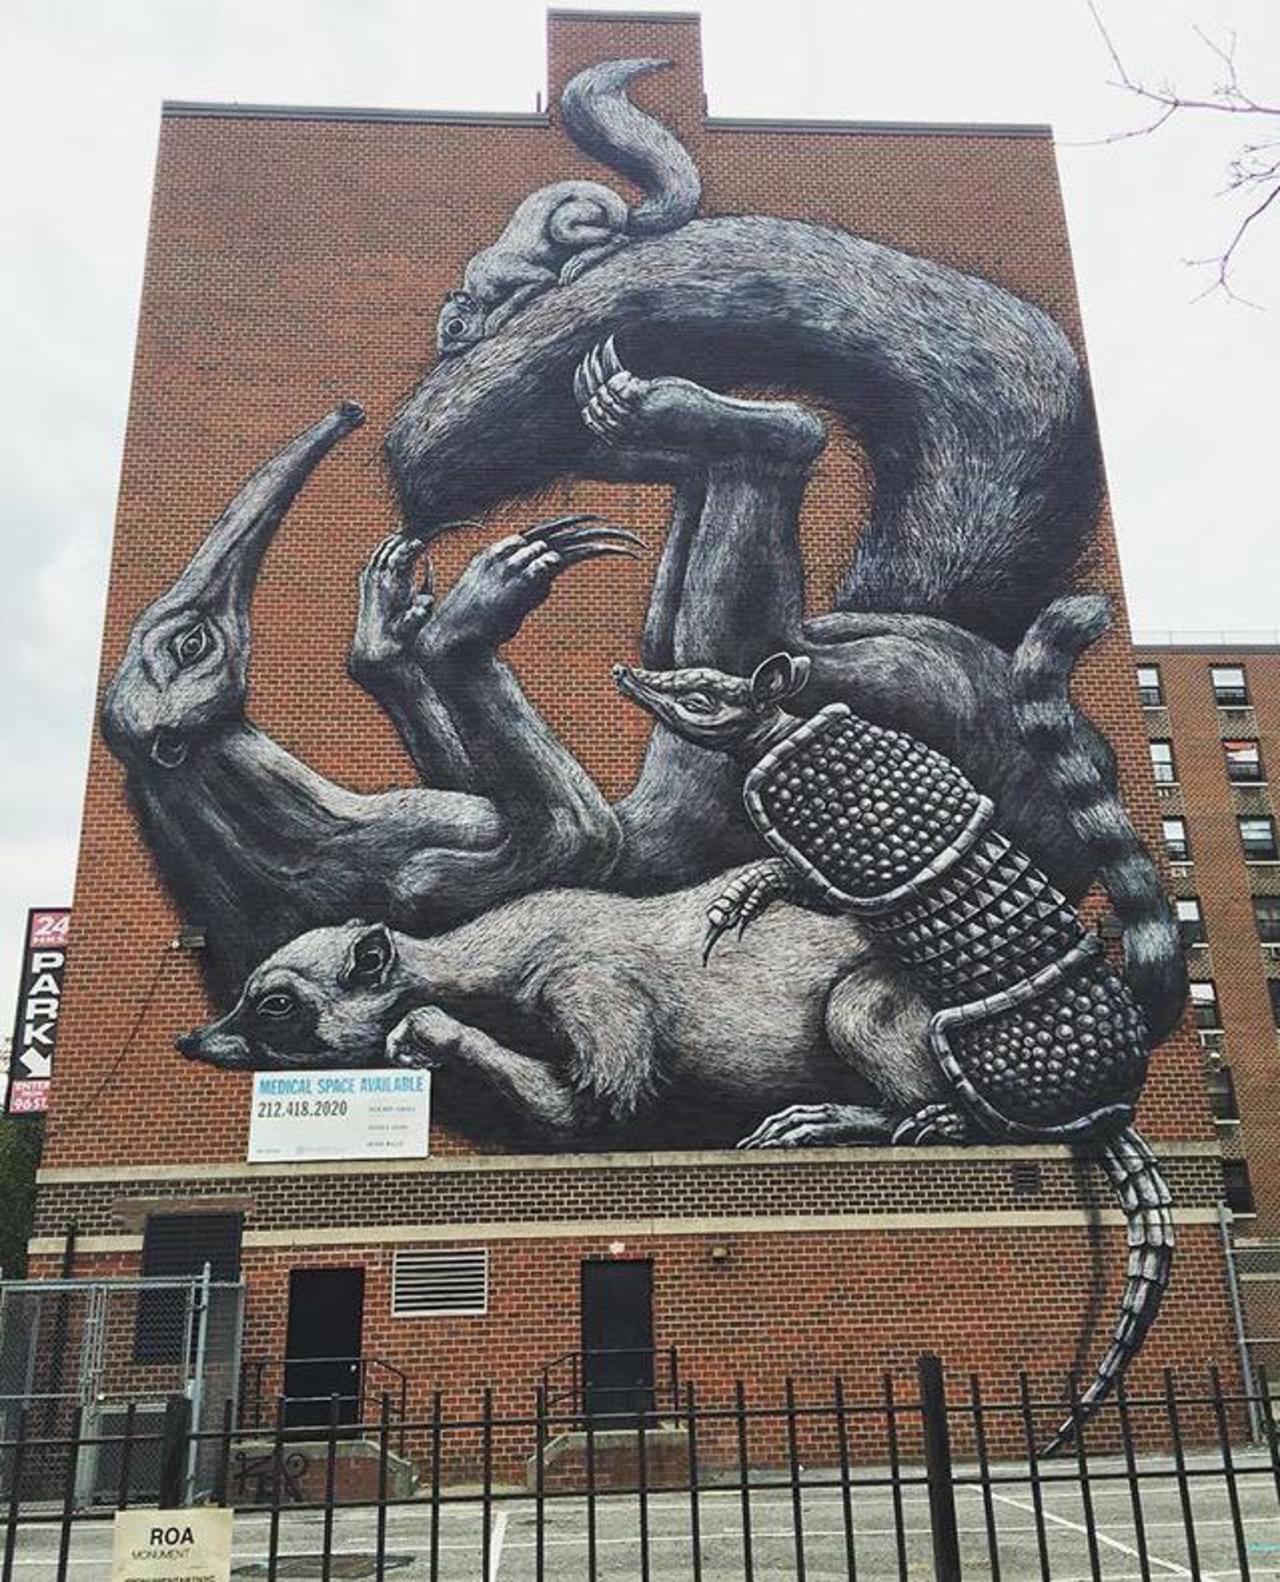 The completed new large scale Street Art wall by ROA in NYC

#art #graffiti #mural #streetart http://t.co/gZvKaQVtm6